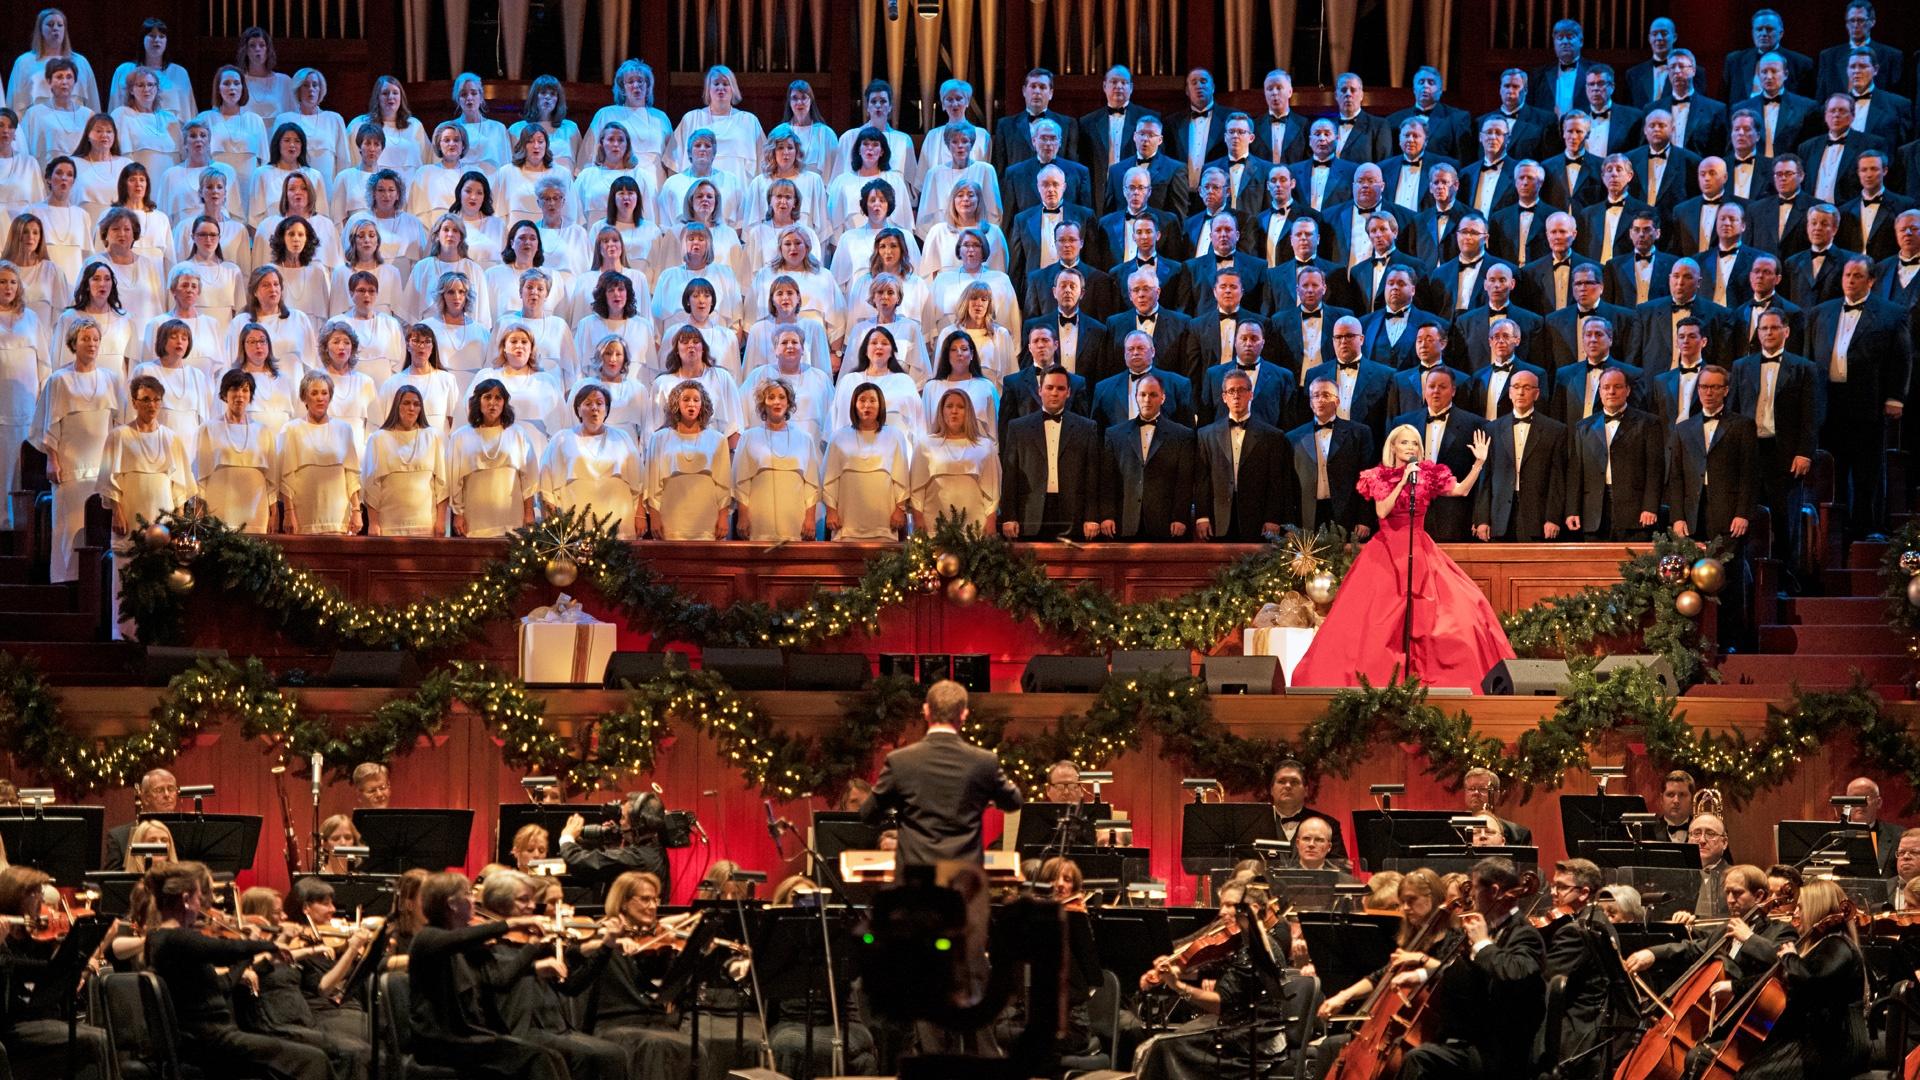 Kristin Chenoweth singing with the Tabernacle Choir behind her and the Orchestra at Temple Square in front of her.